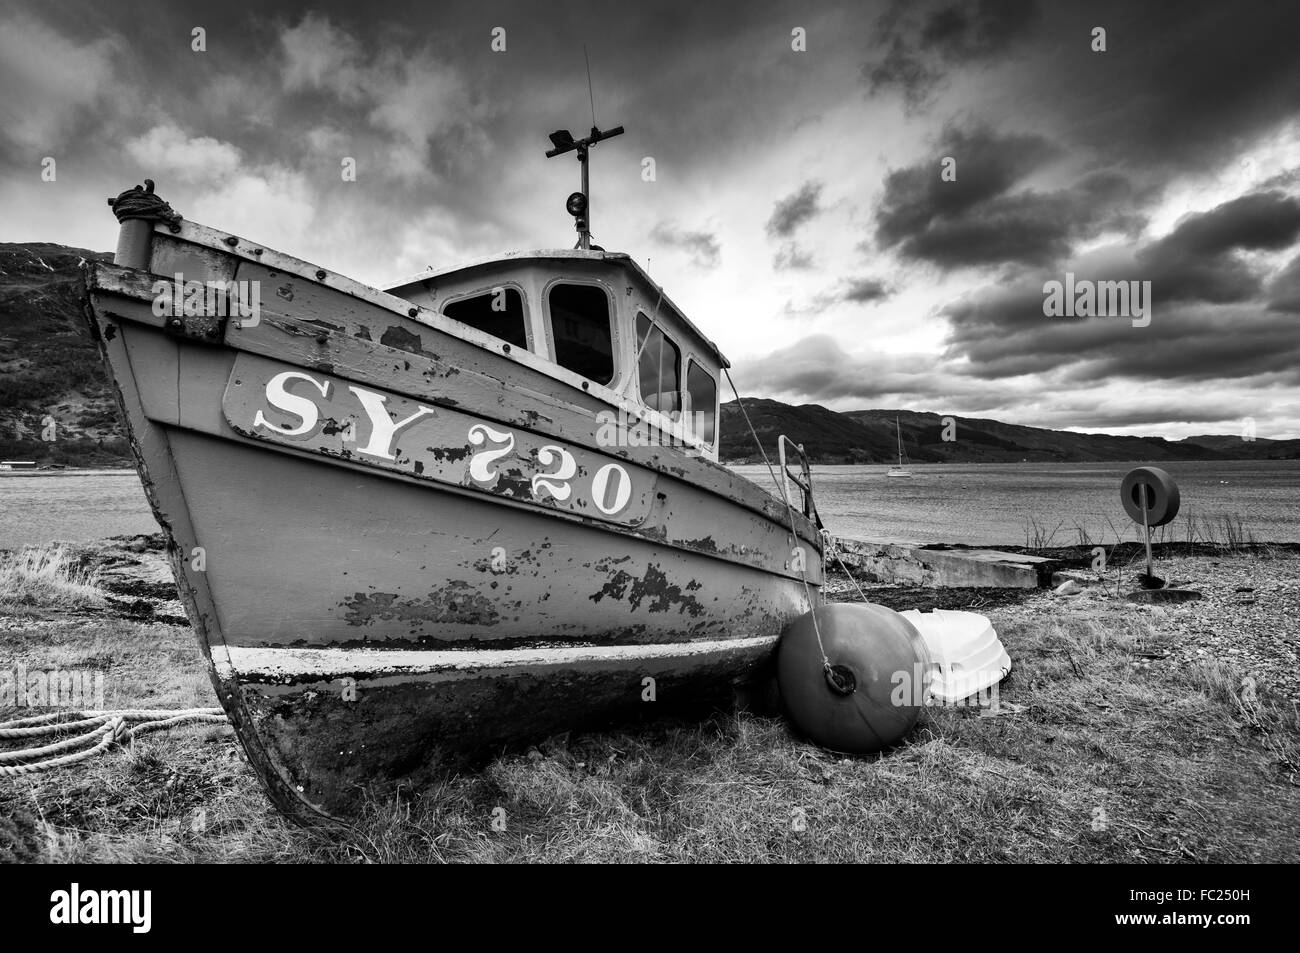 A boat on the beach at Invershiel, on the banks of Loch Duich in the Scottish Highlands, UK Stock Photo